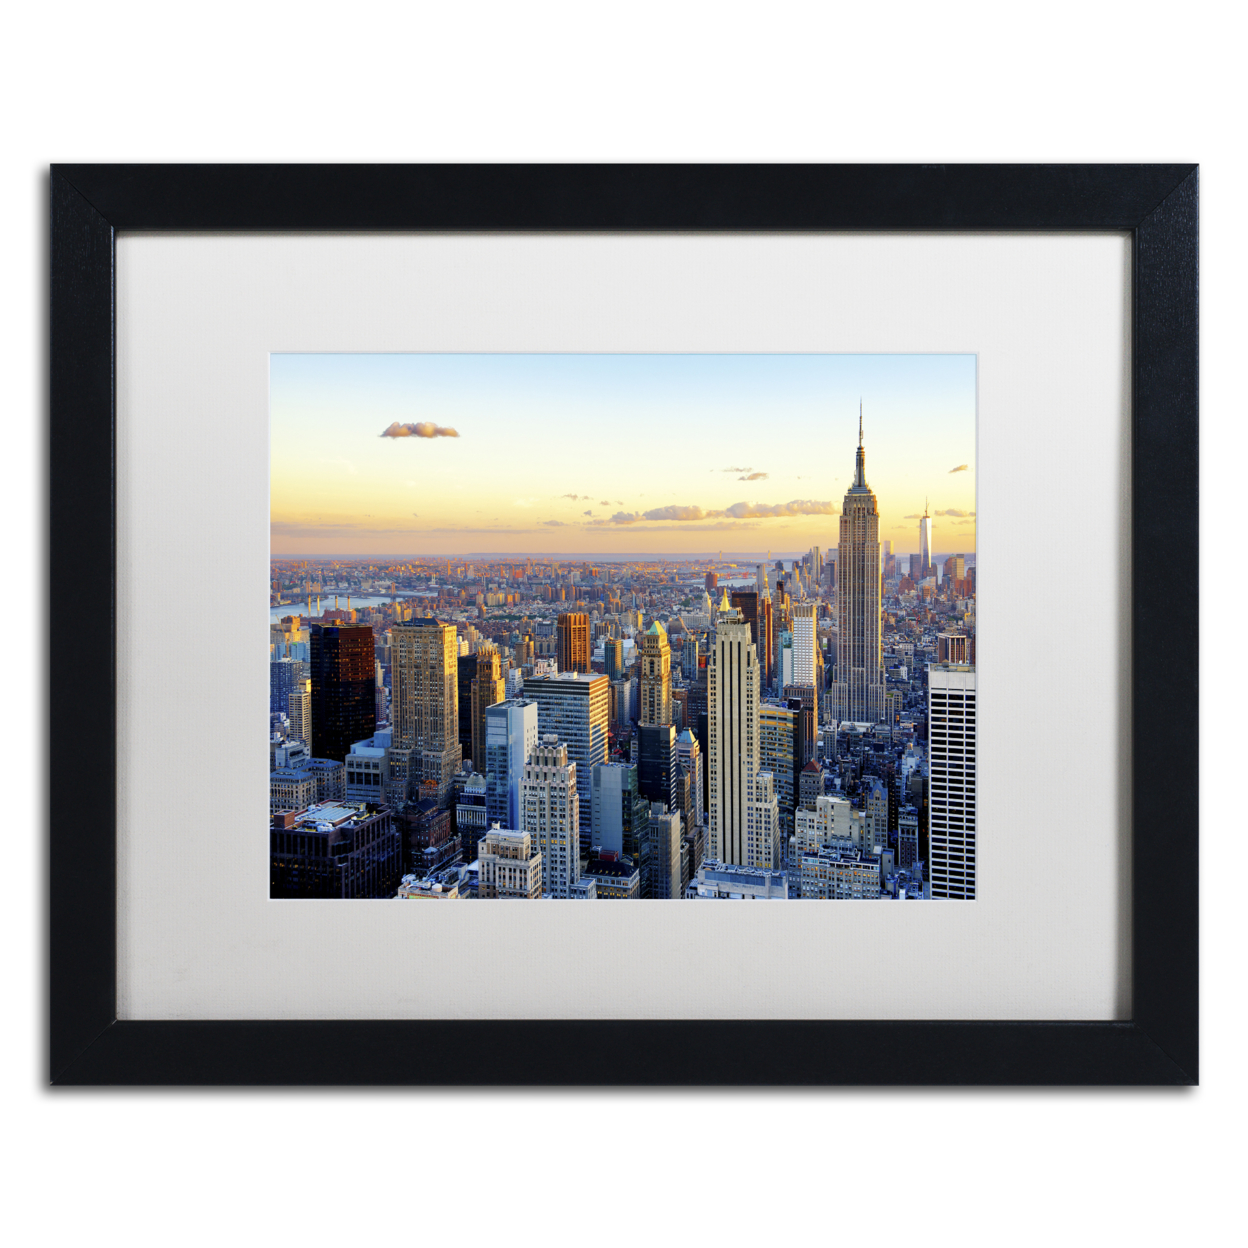 Philippe Hugonnard 'NYC At Sunset' Black Wooden Framed Art 18 X 22 Inches